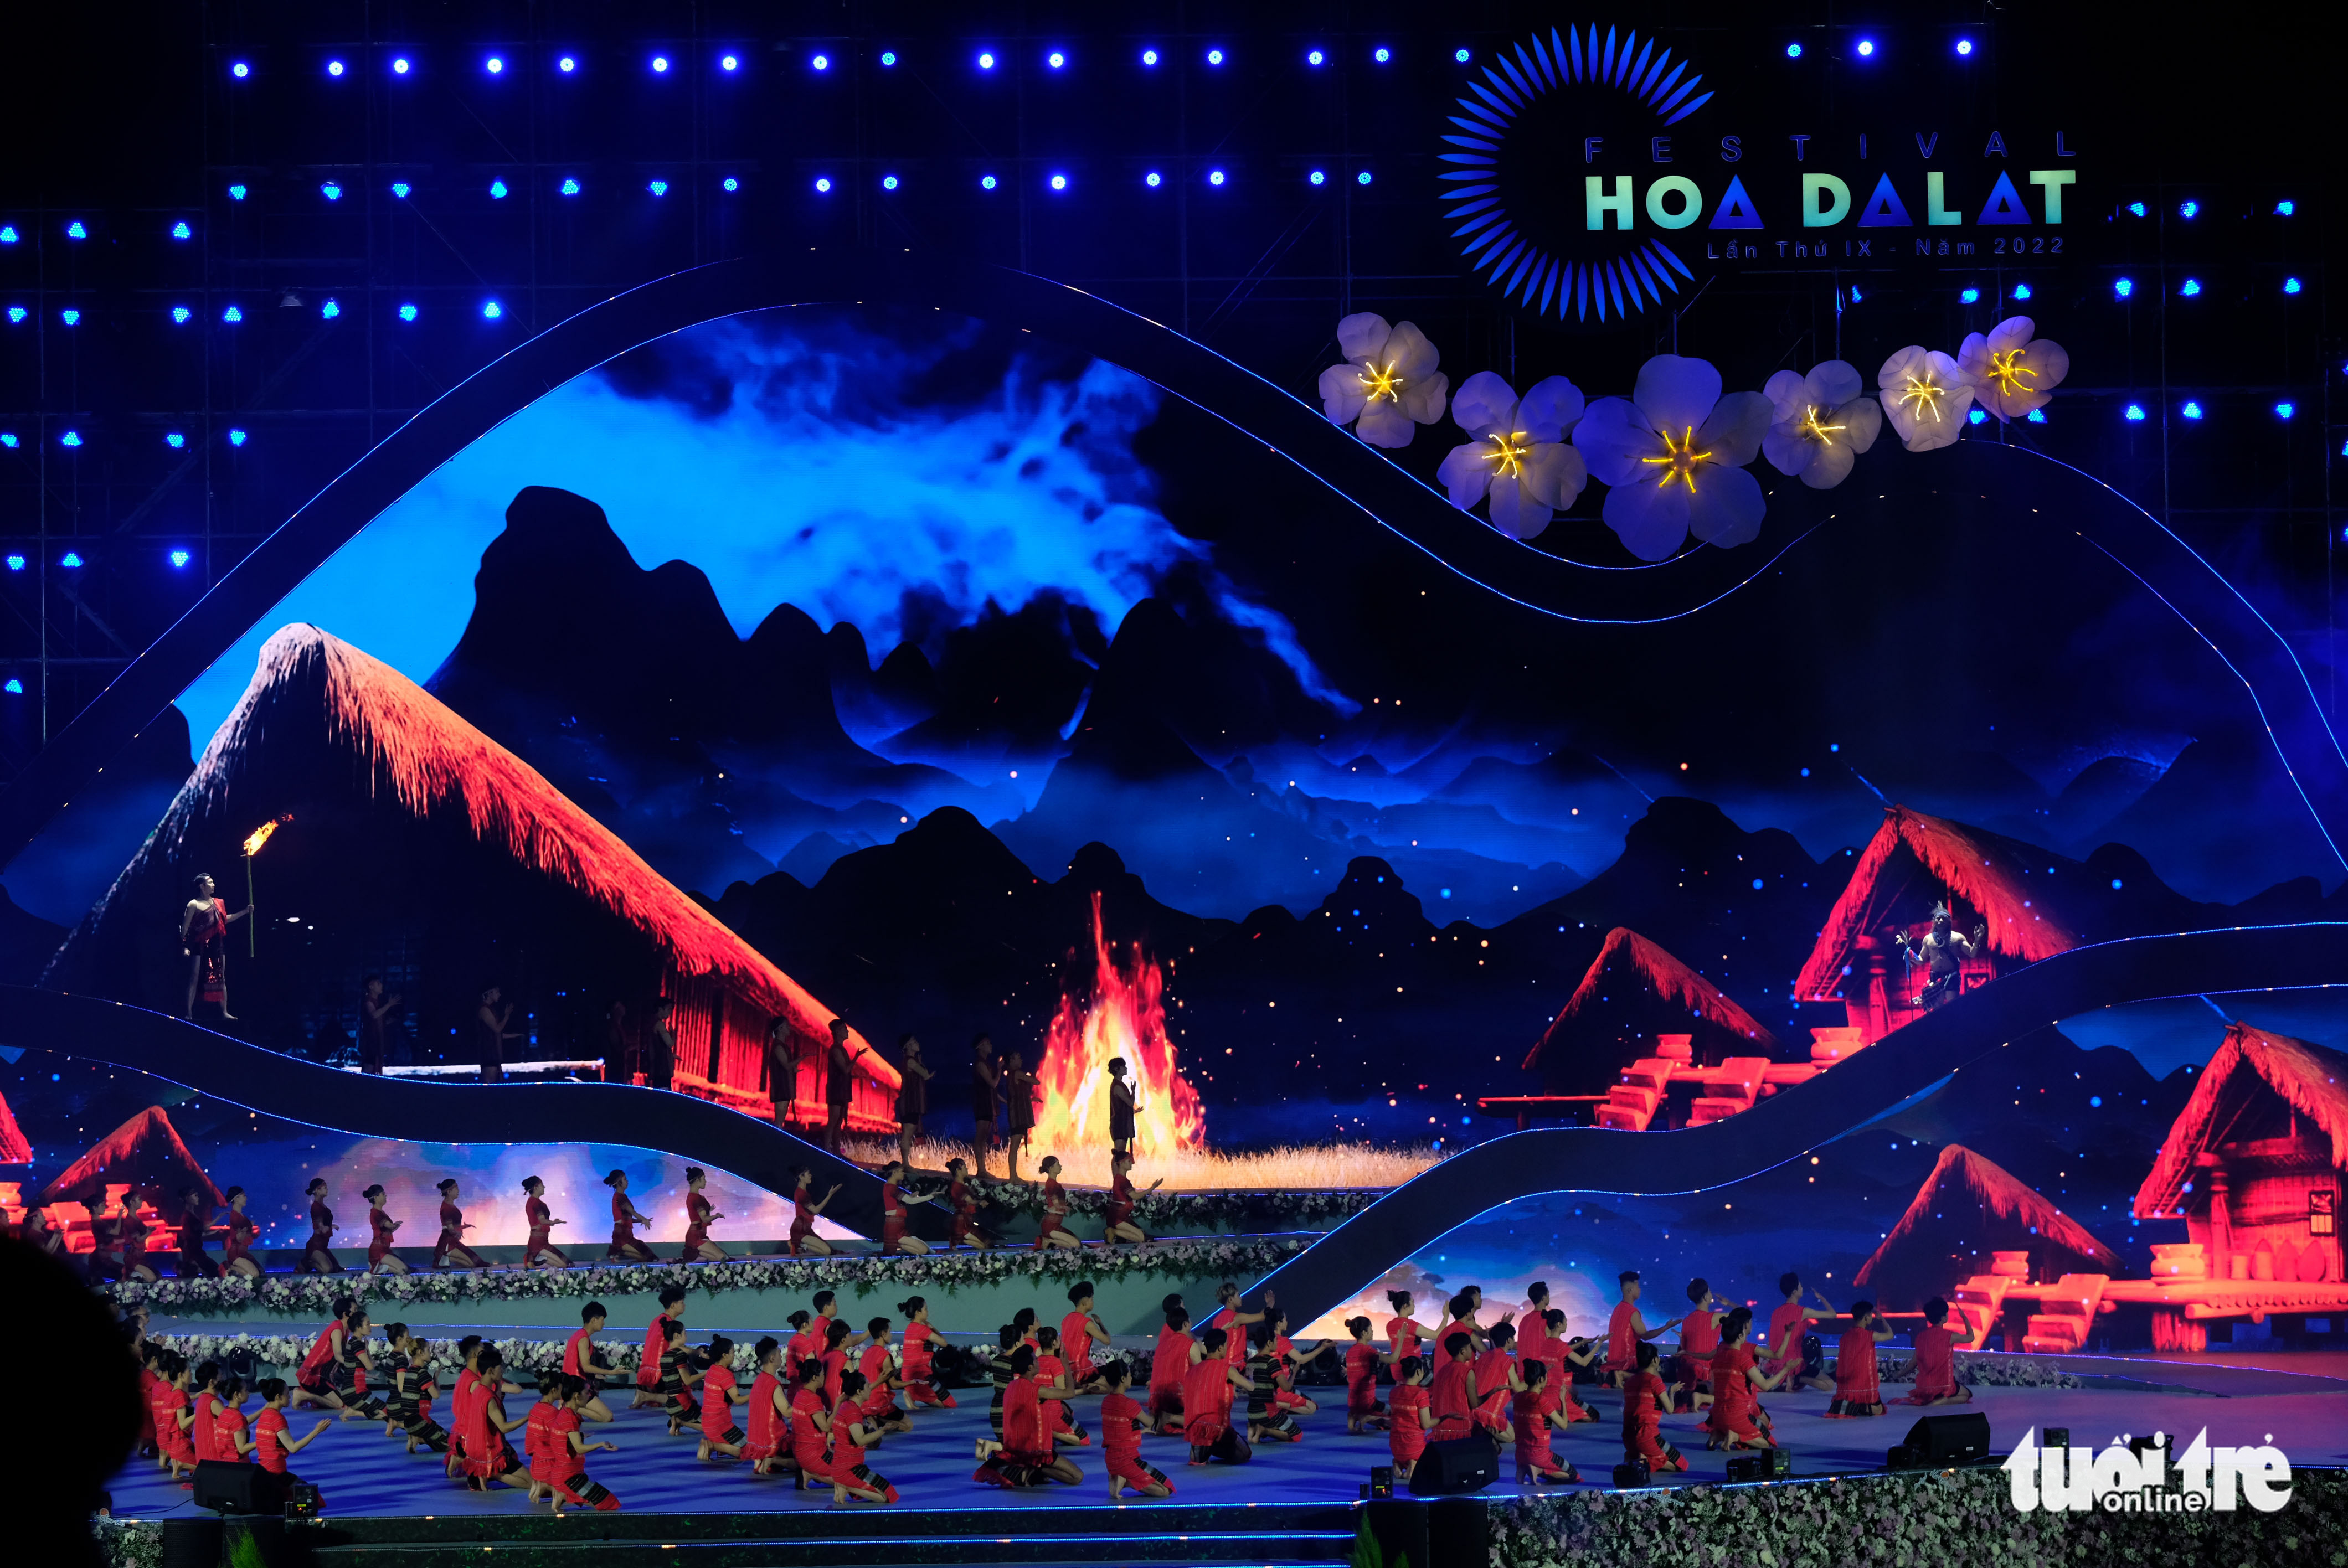 Artists perform at the opening ceremony of the Da Lat Flower Festival 2022 in Da Lat City, Lam Dong Province, Vietnam, December 18, 2022. Photo: M.V. / Tuoi Tre